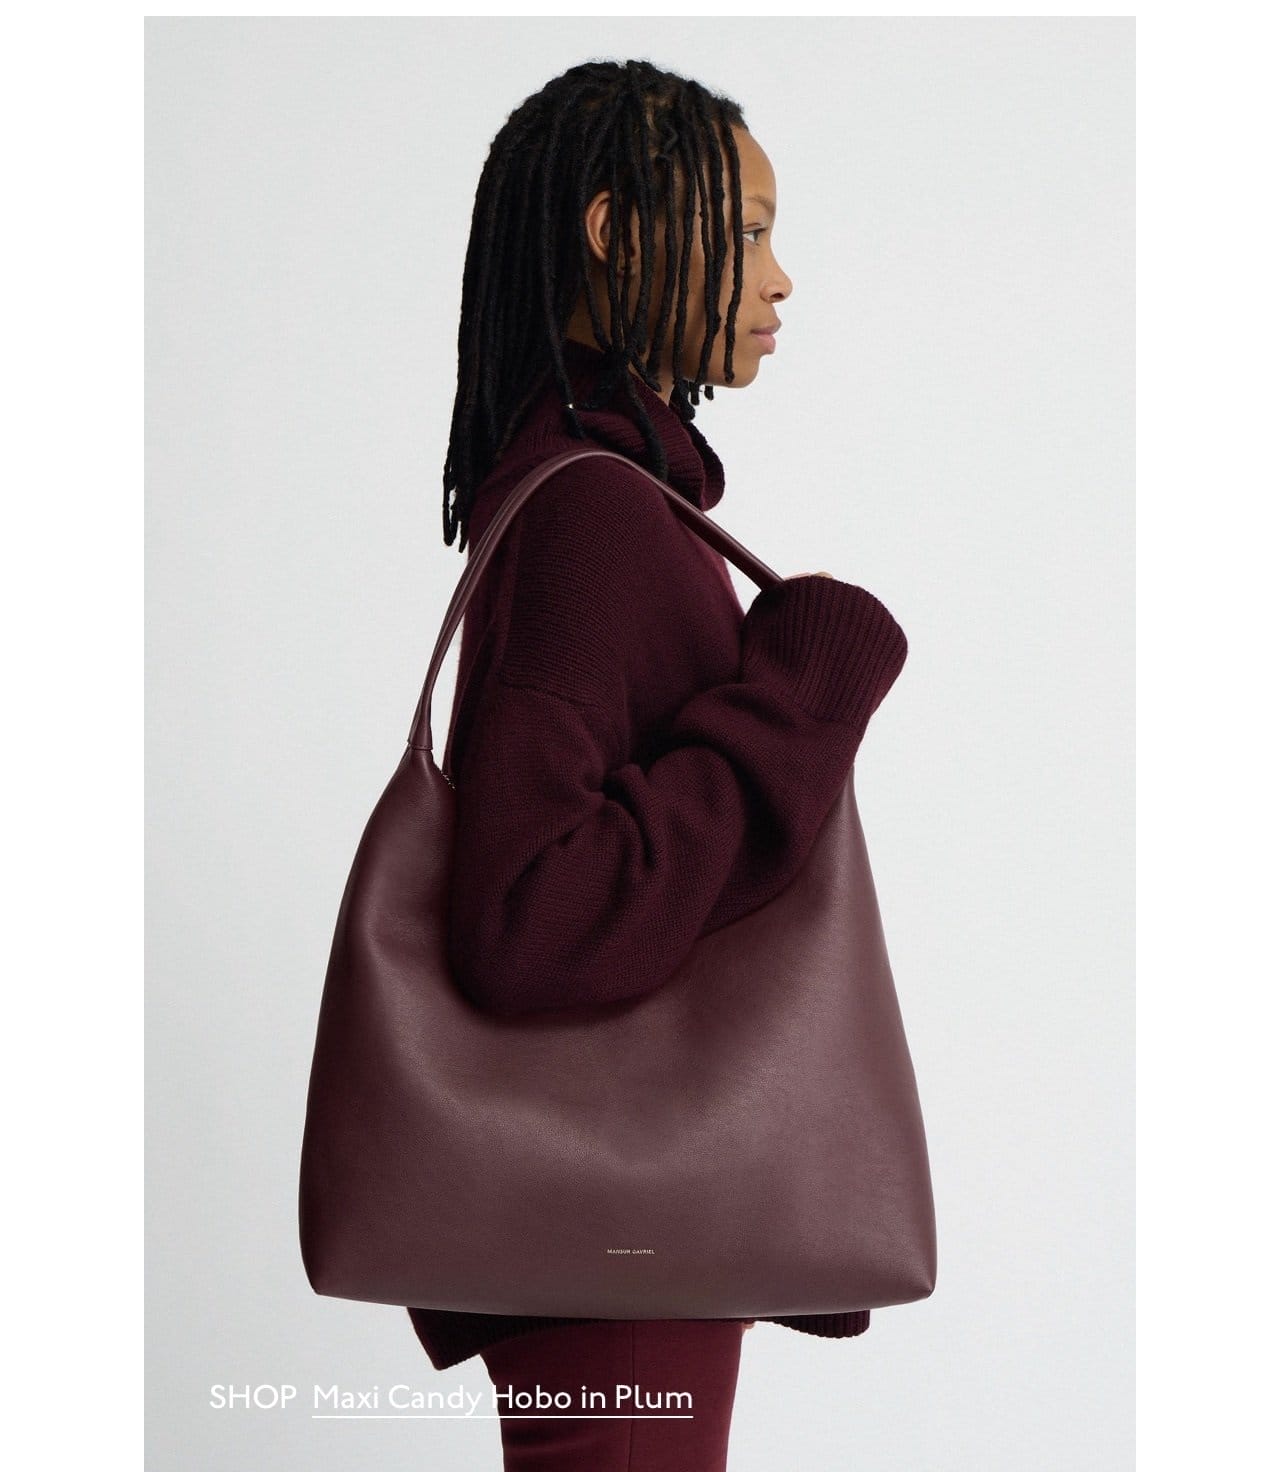 Everyone is wearing the MG Candy Hobo. Picutred: Maxi Candy Hobo in Plum.